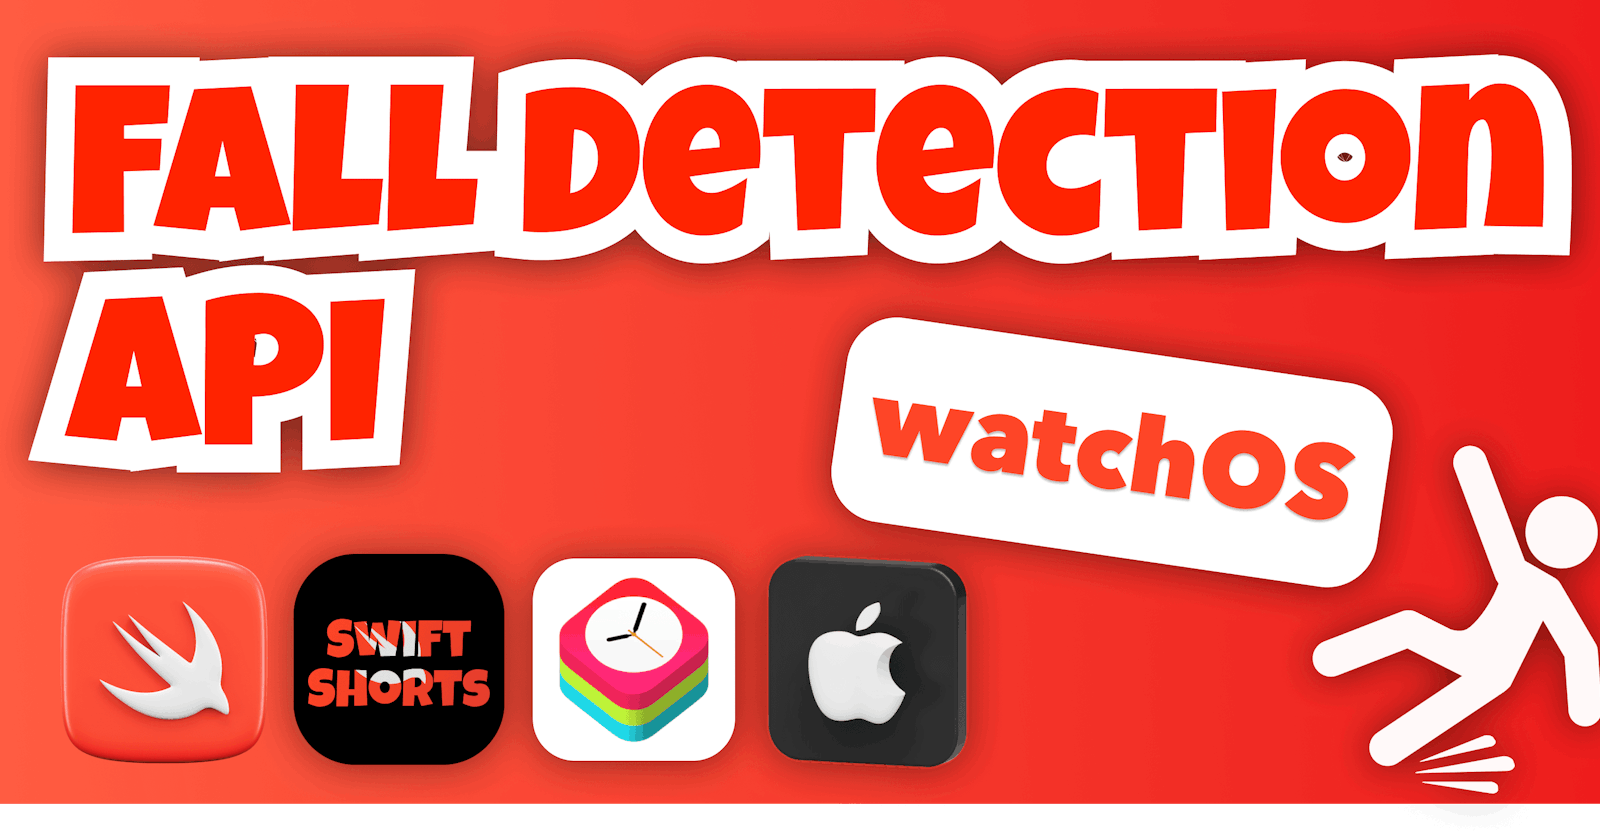 Fall Detection API in Swift for watchOS